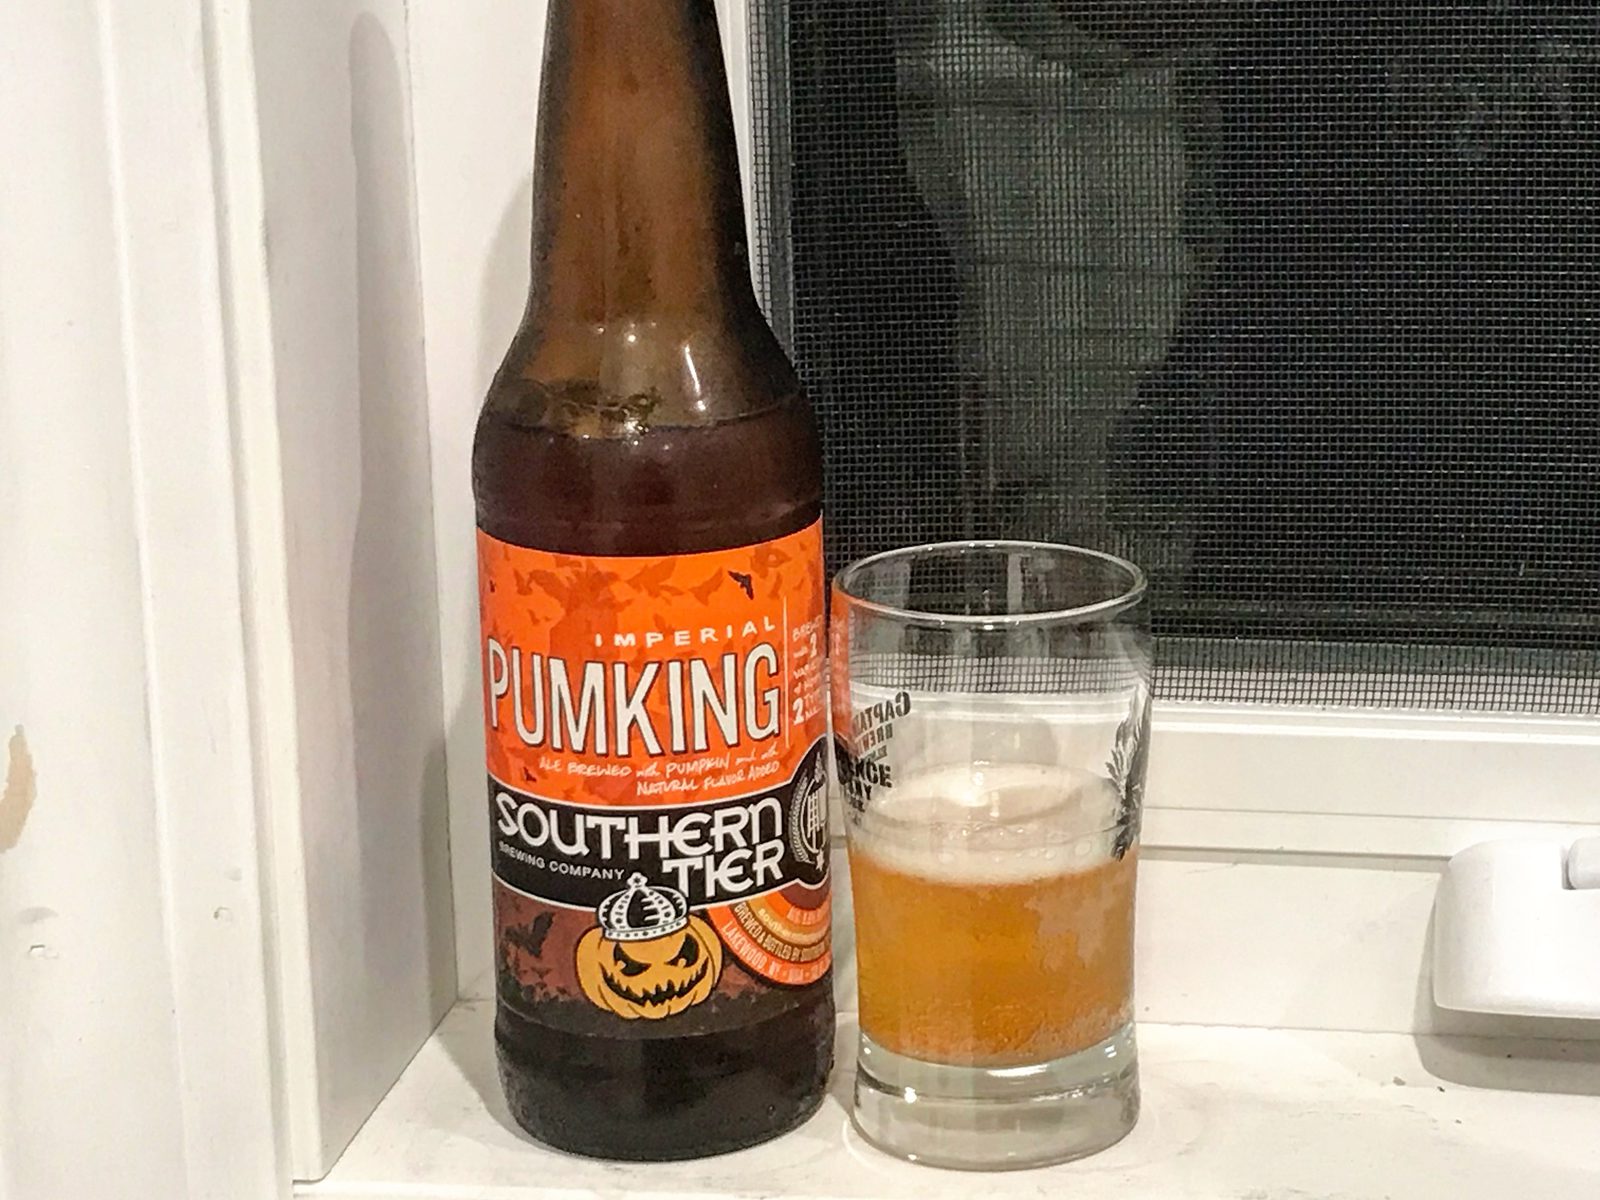 Southern Tier Brewing Company: Imperial Pumking